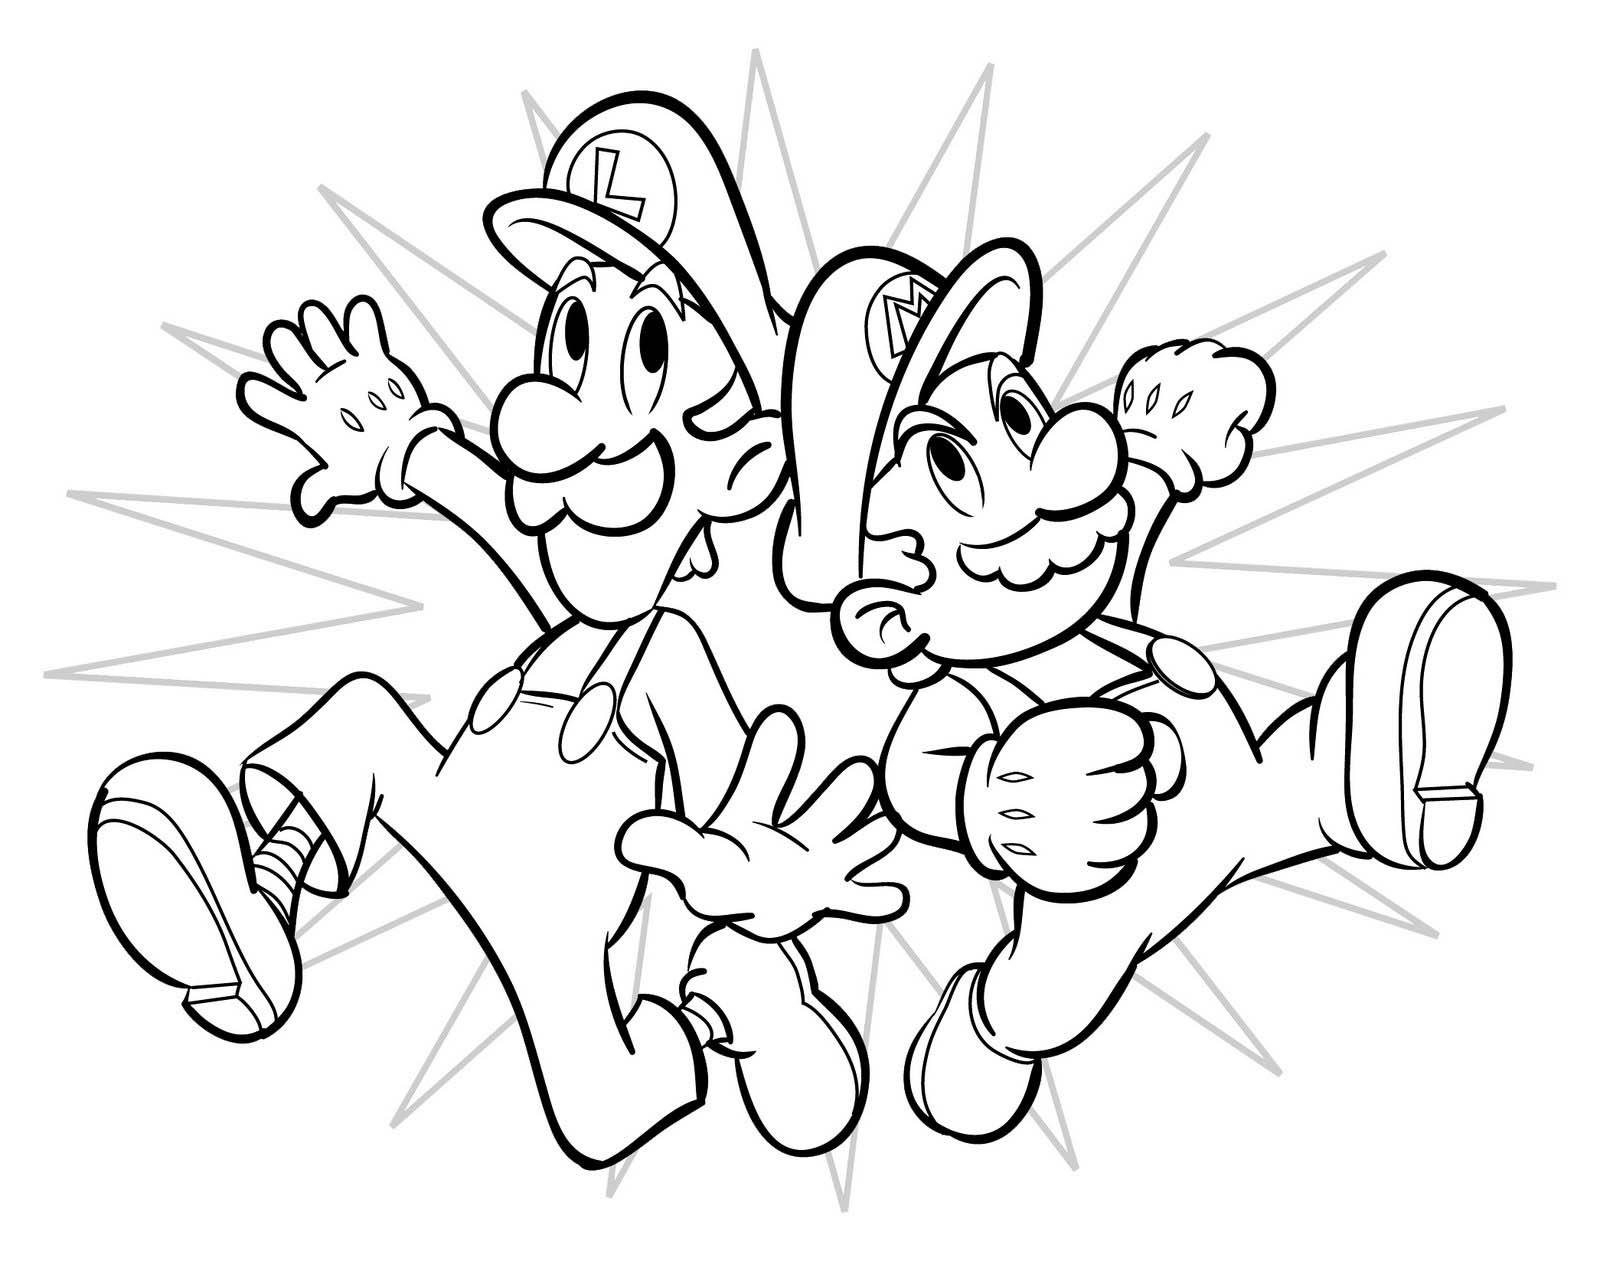 mario coloring pictures coloring pages mega blog mario bros coloring pages mario coloring pictures 